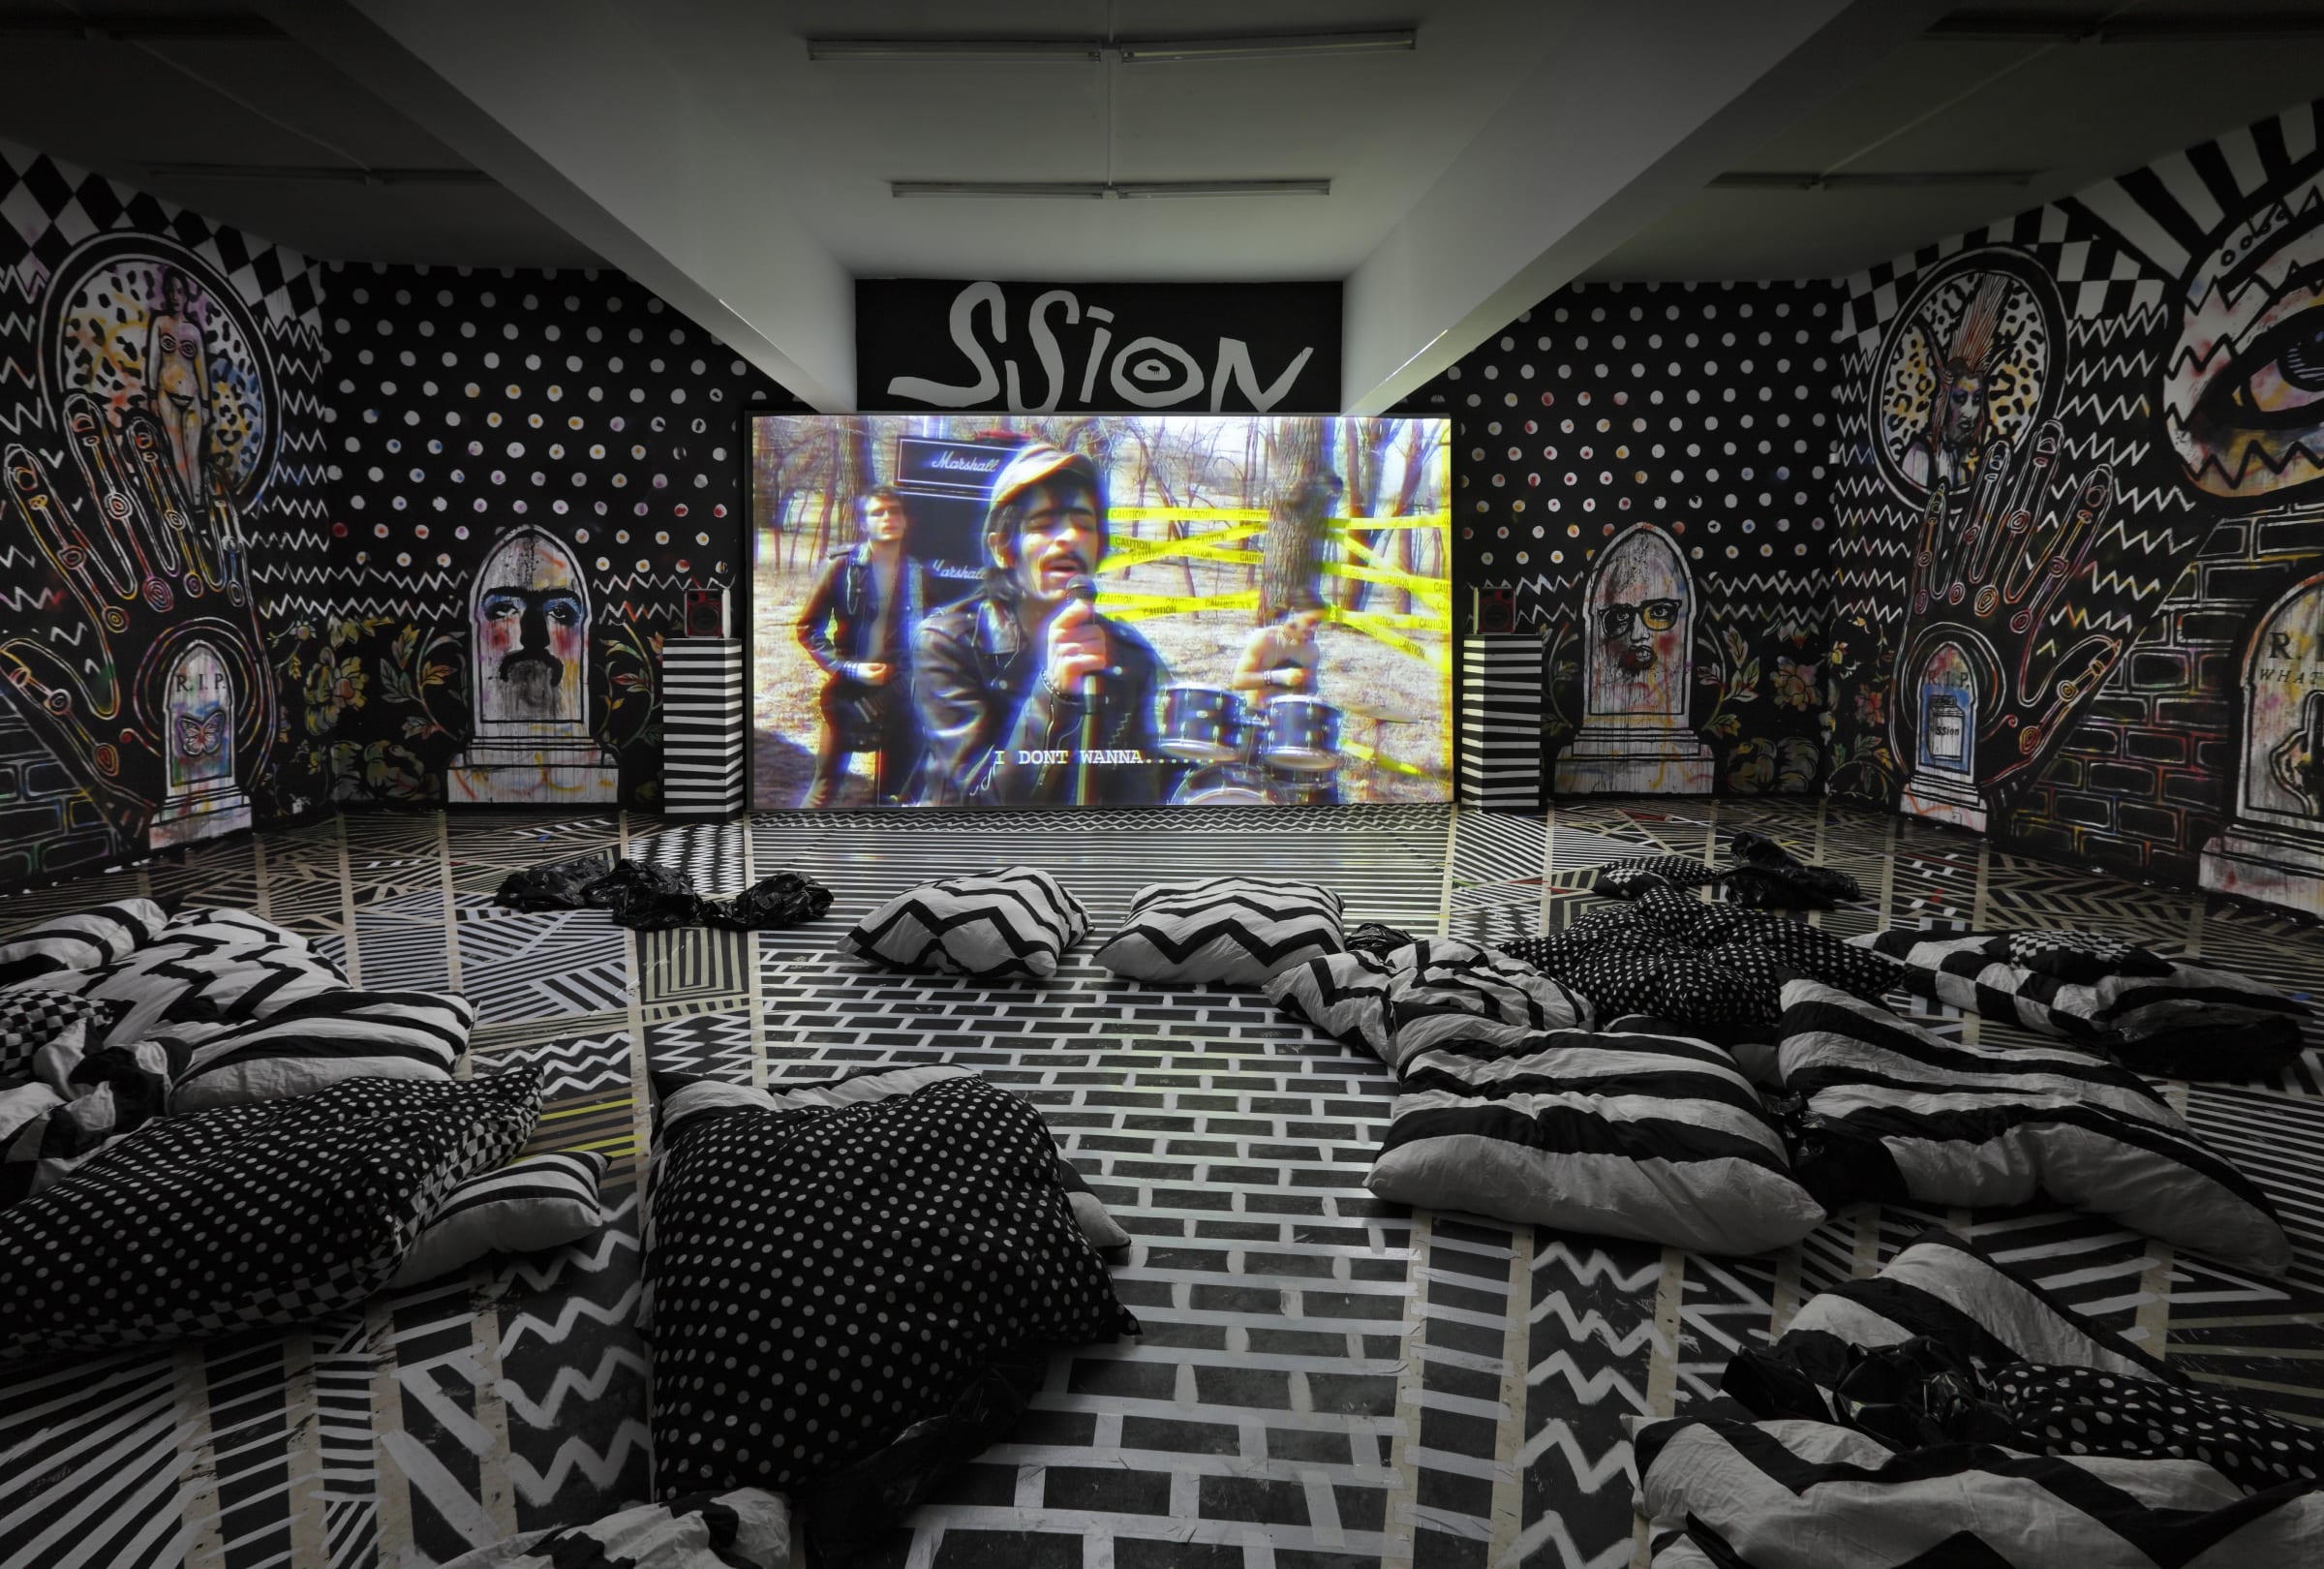 SSION BOY Installation View June 26 – August 7, 2010 Peres Projects, Berlin